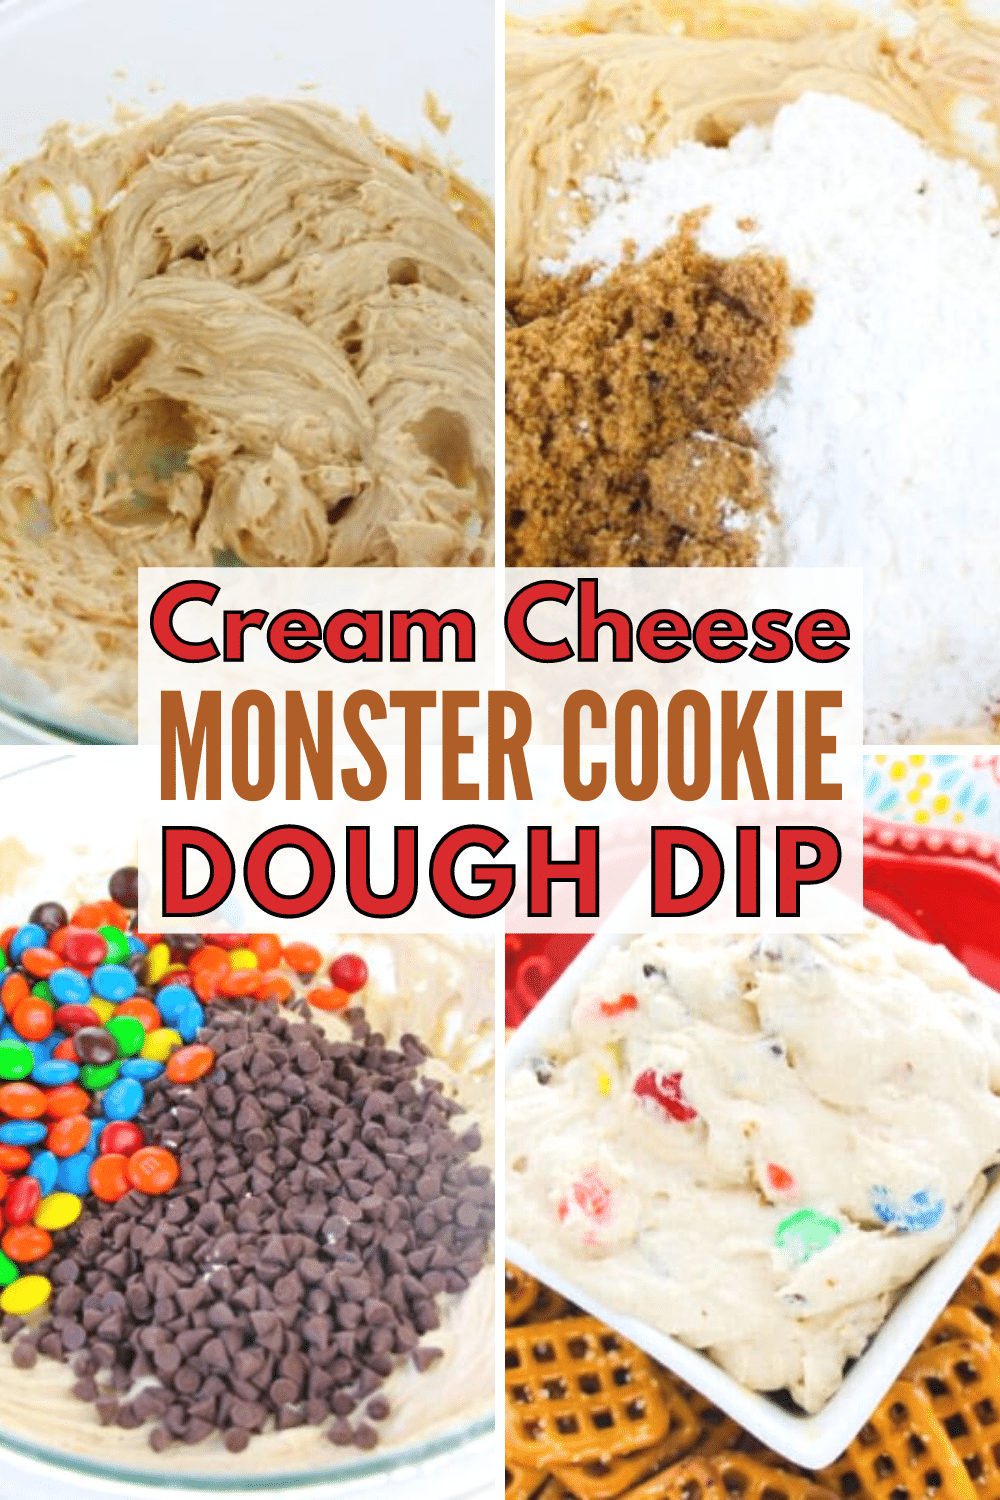 Cream cheese monster cookie dough dip is a delicious and indulgent treat that combines the creaminess of cream cheese with the sweetness of cookie dough. This dip is perfect for parties or as an afternoon snack.